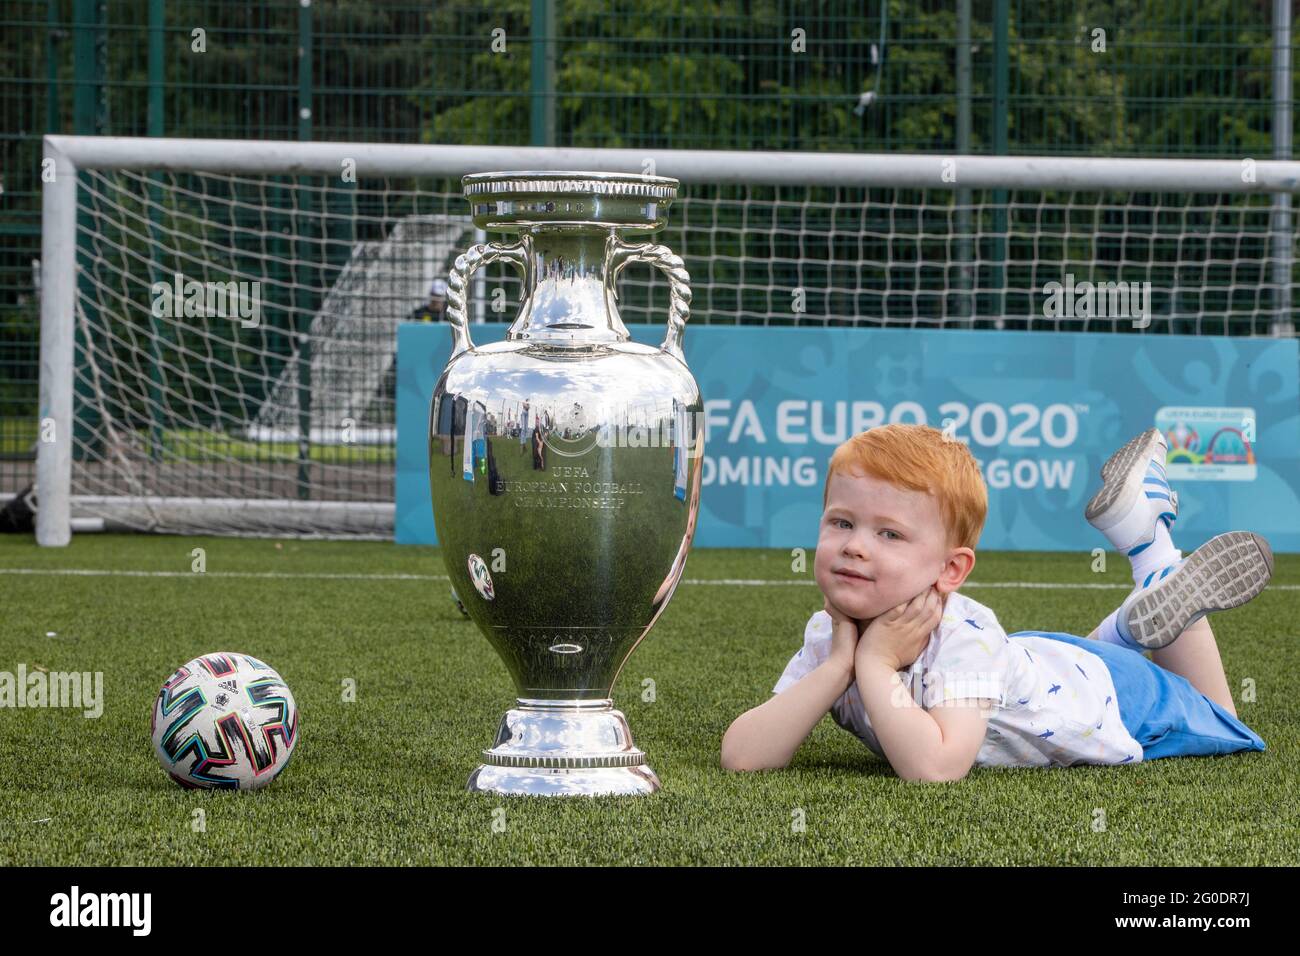 Handout photo dated 02/06/2021 provided by JSHPIX of Glasgow youngster Hugo  getting their first look at Euro 2020 trophy as the Henri Delaunay Cup made  a special visit to Glasgow's Walking Football